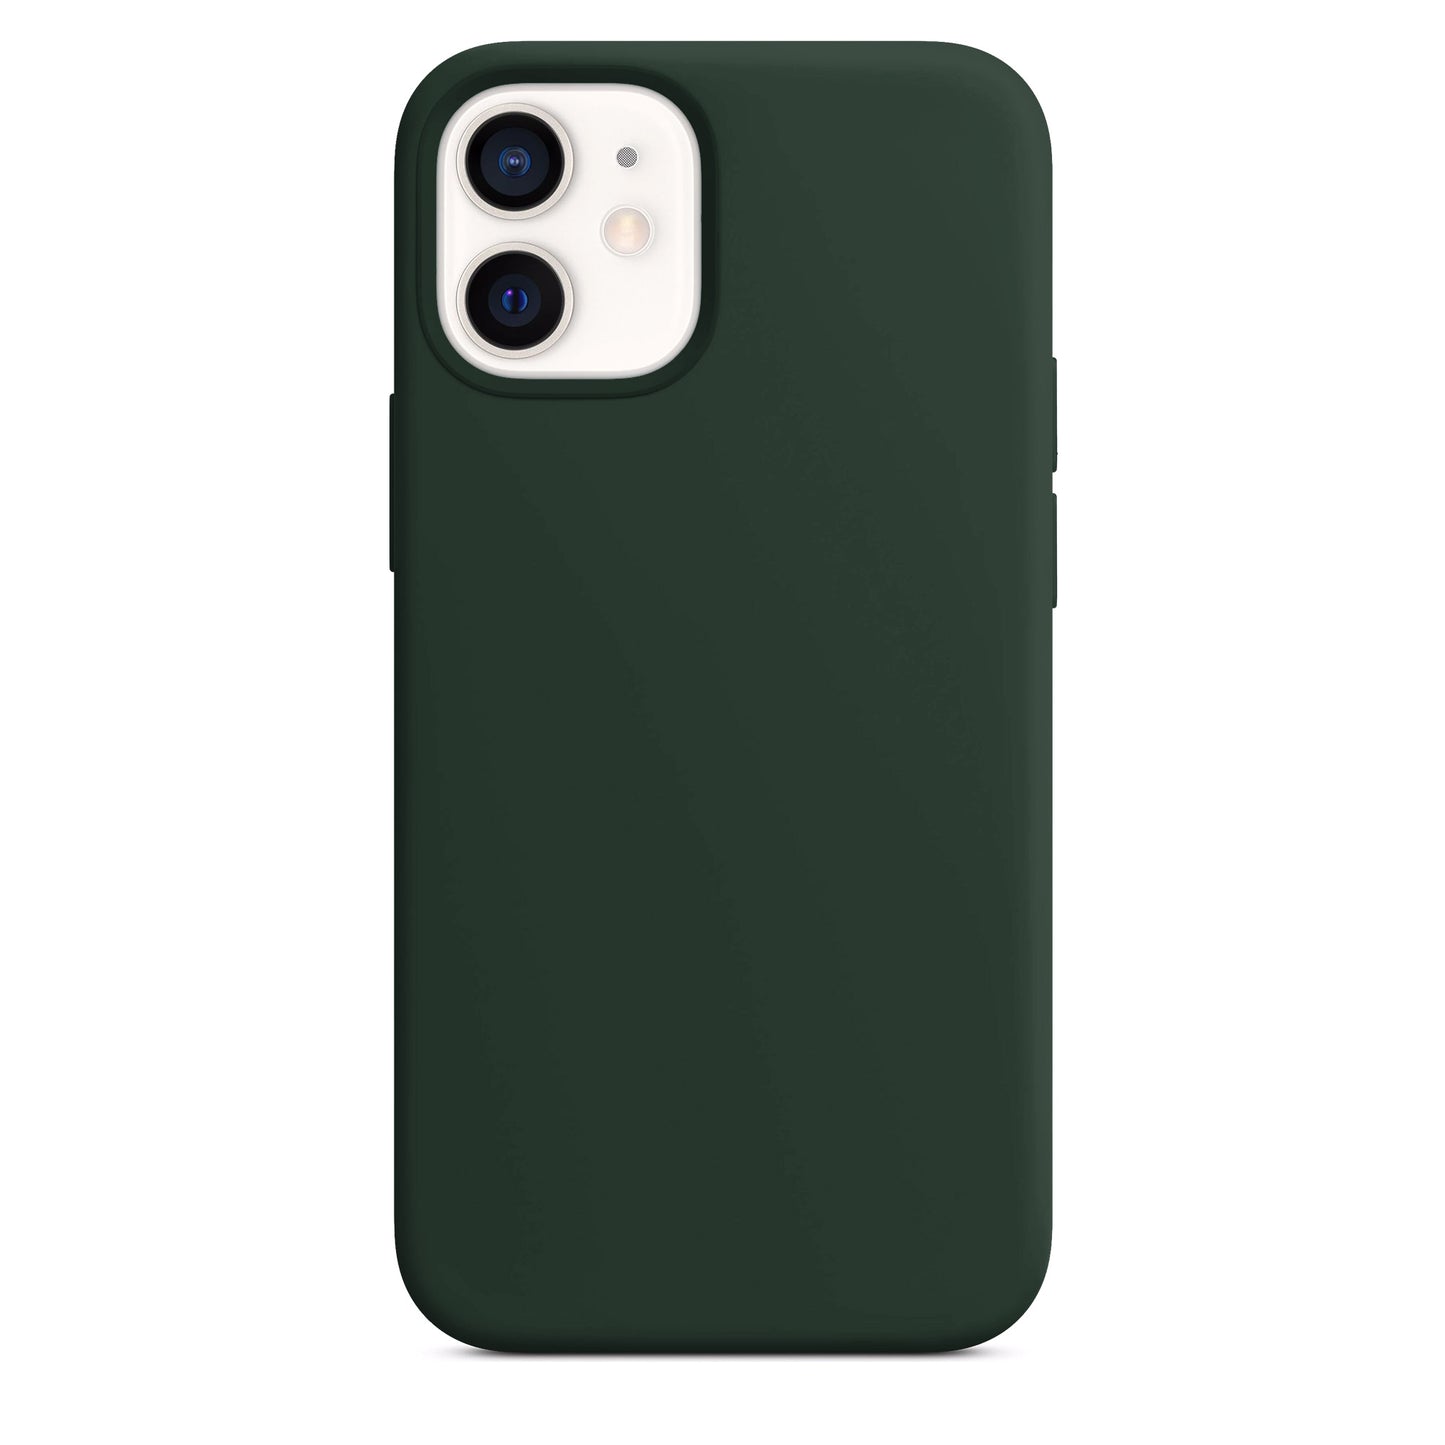 Cypruss Green Silicone Case for iPhone